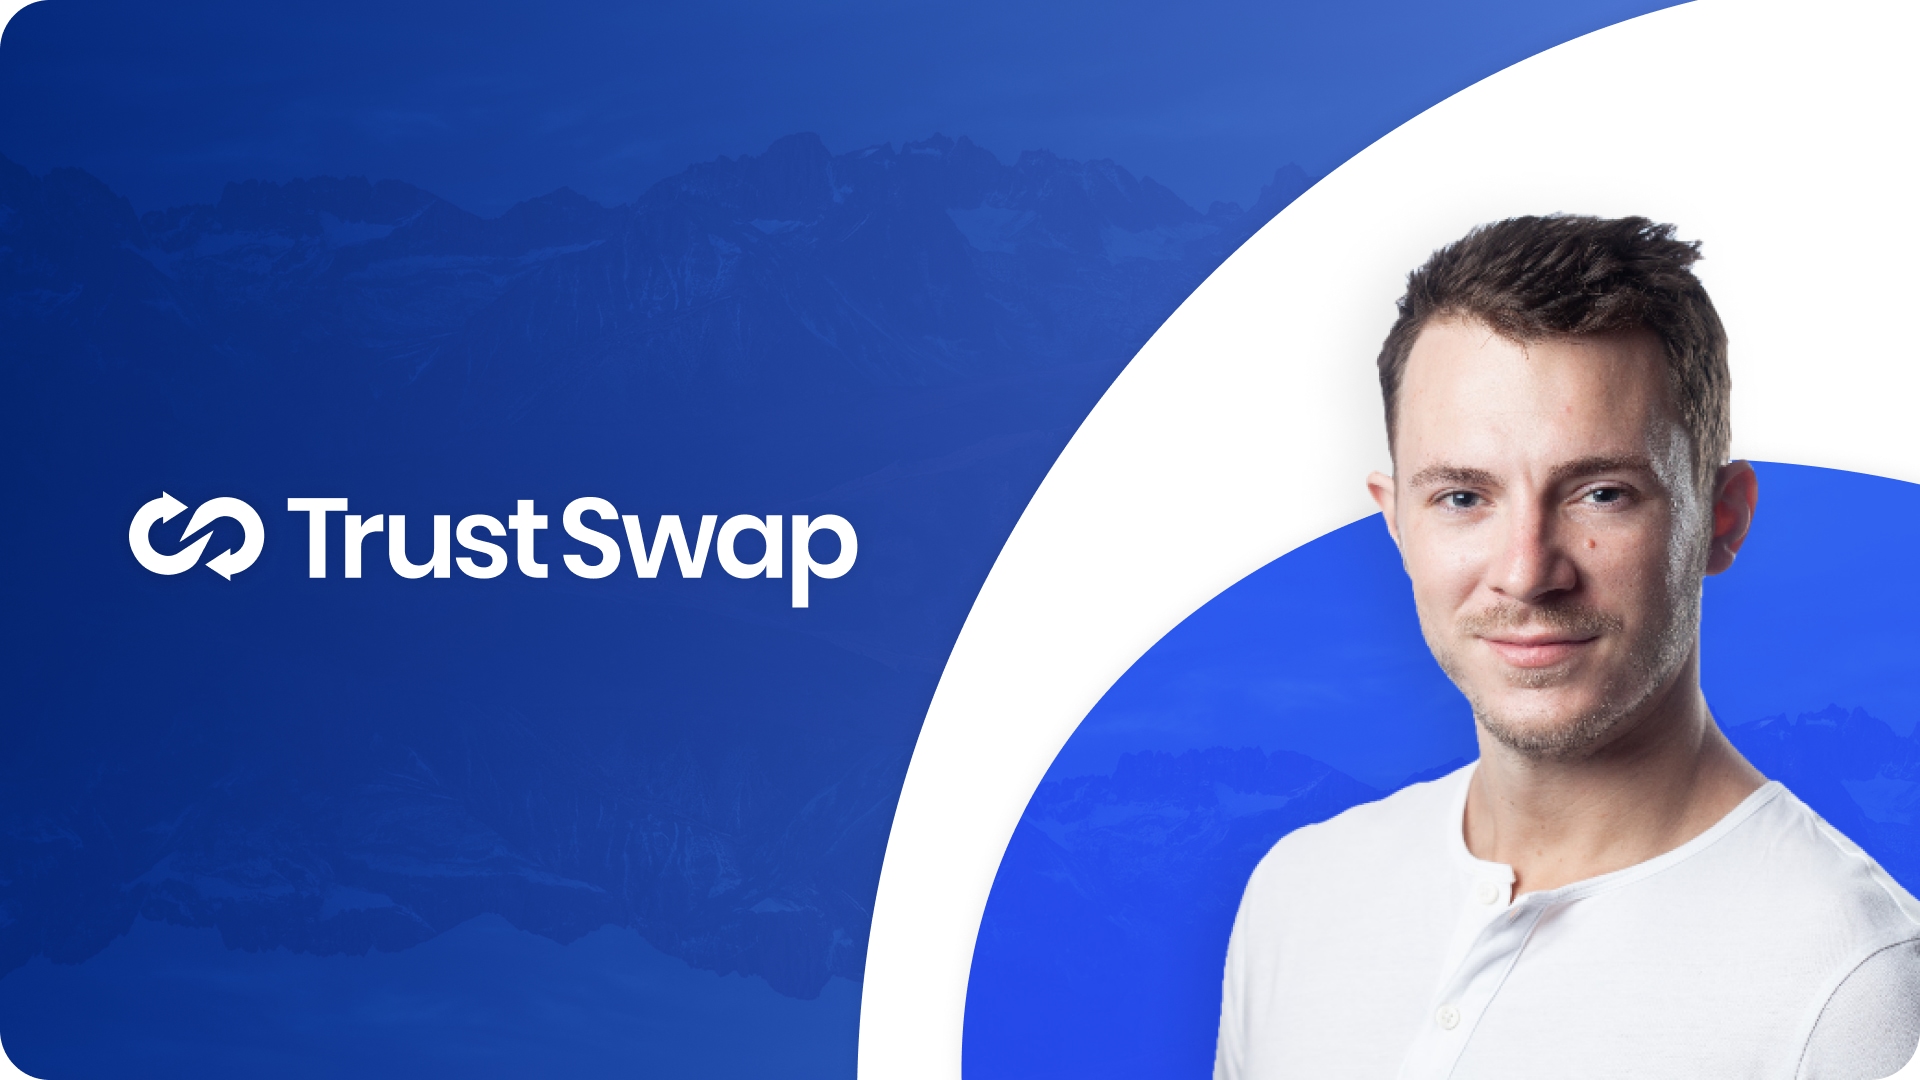 TrustSwap Announces The Resignation of Jeff Kirdeikis from its Board of Directors